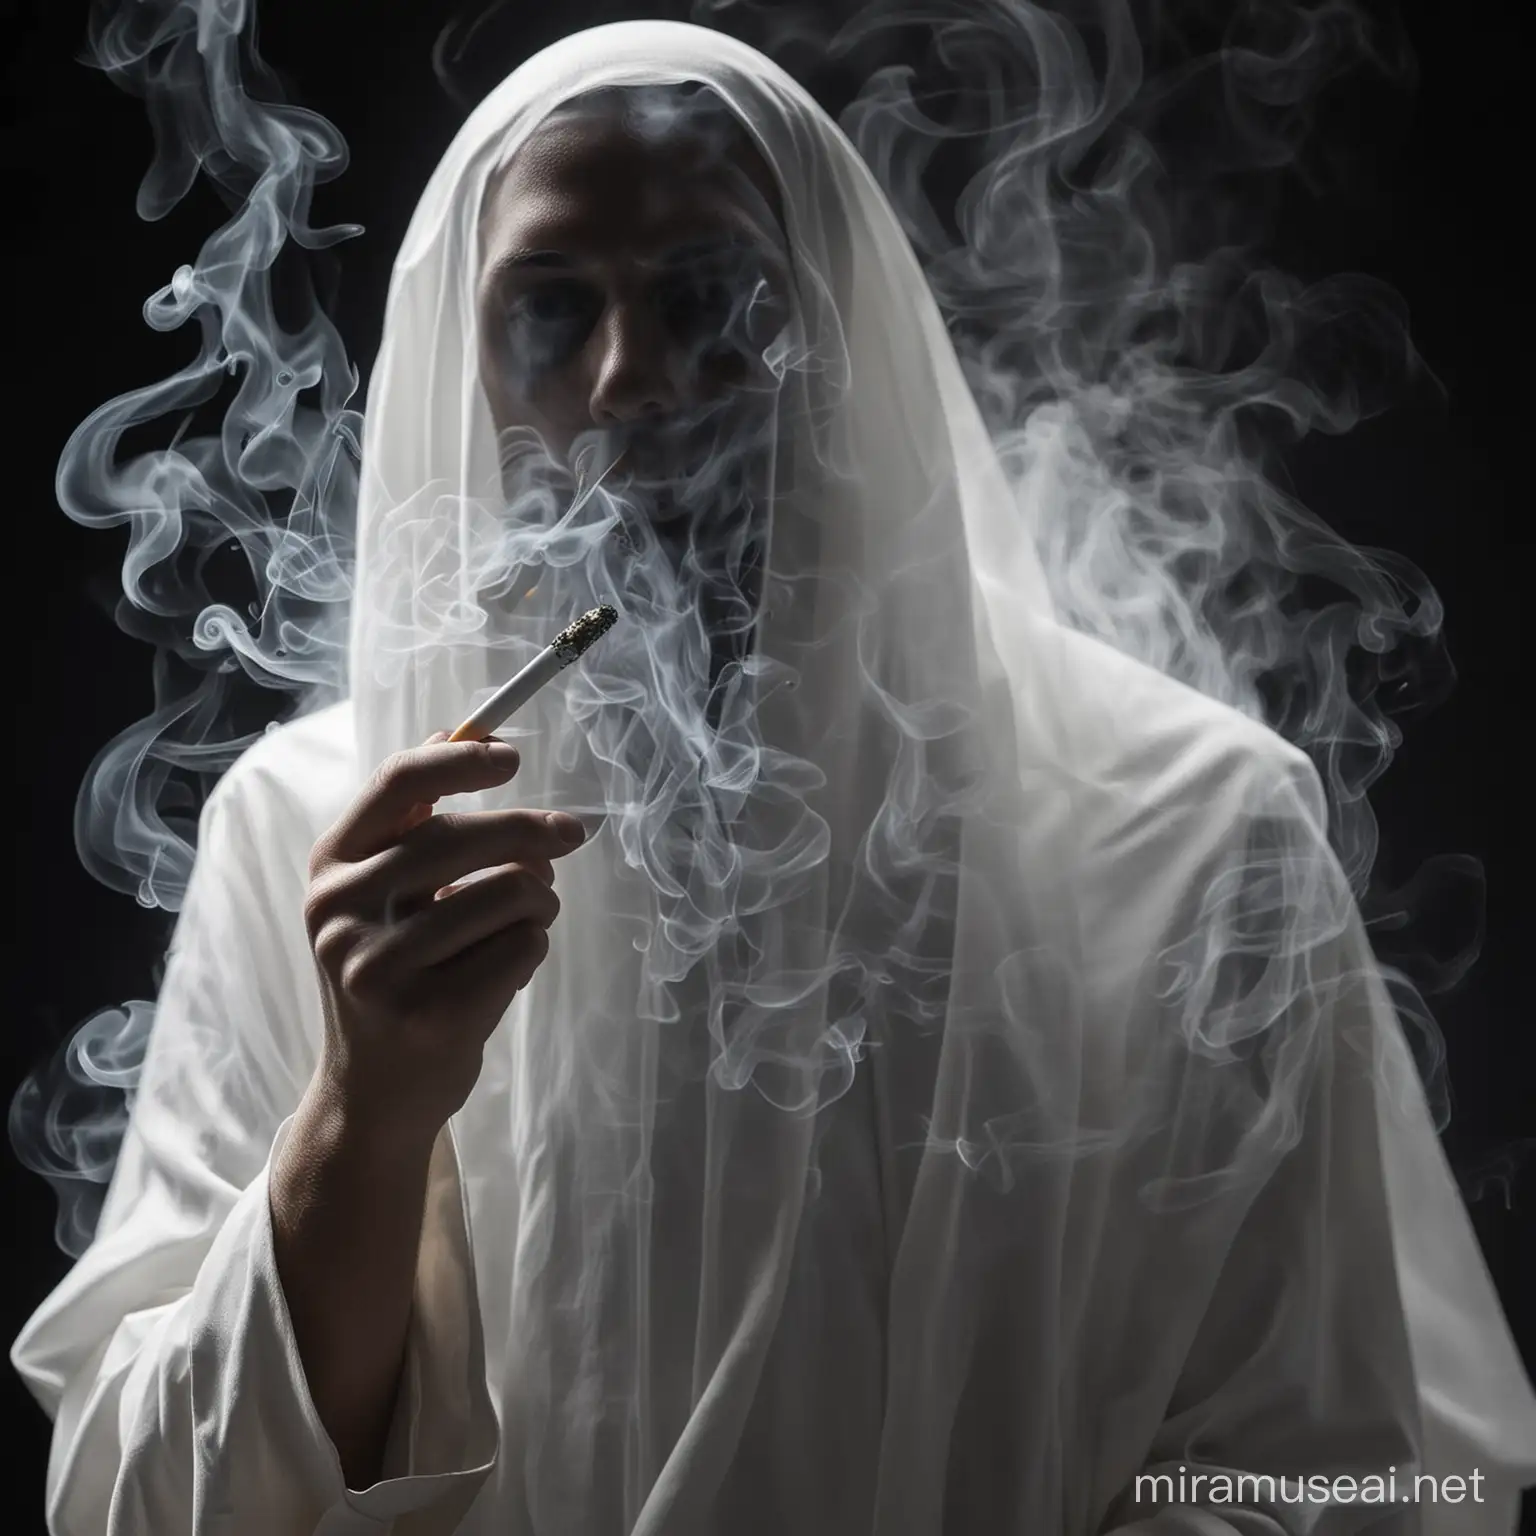 The smoke from a lit cigarette forms a ghost 